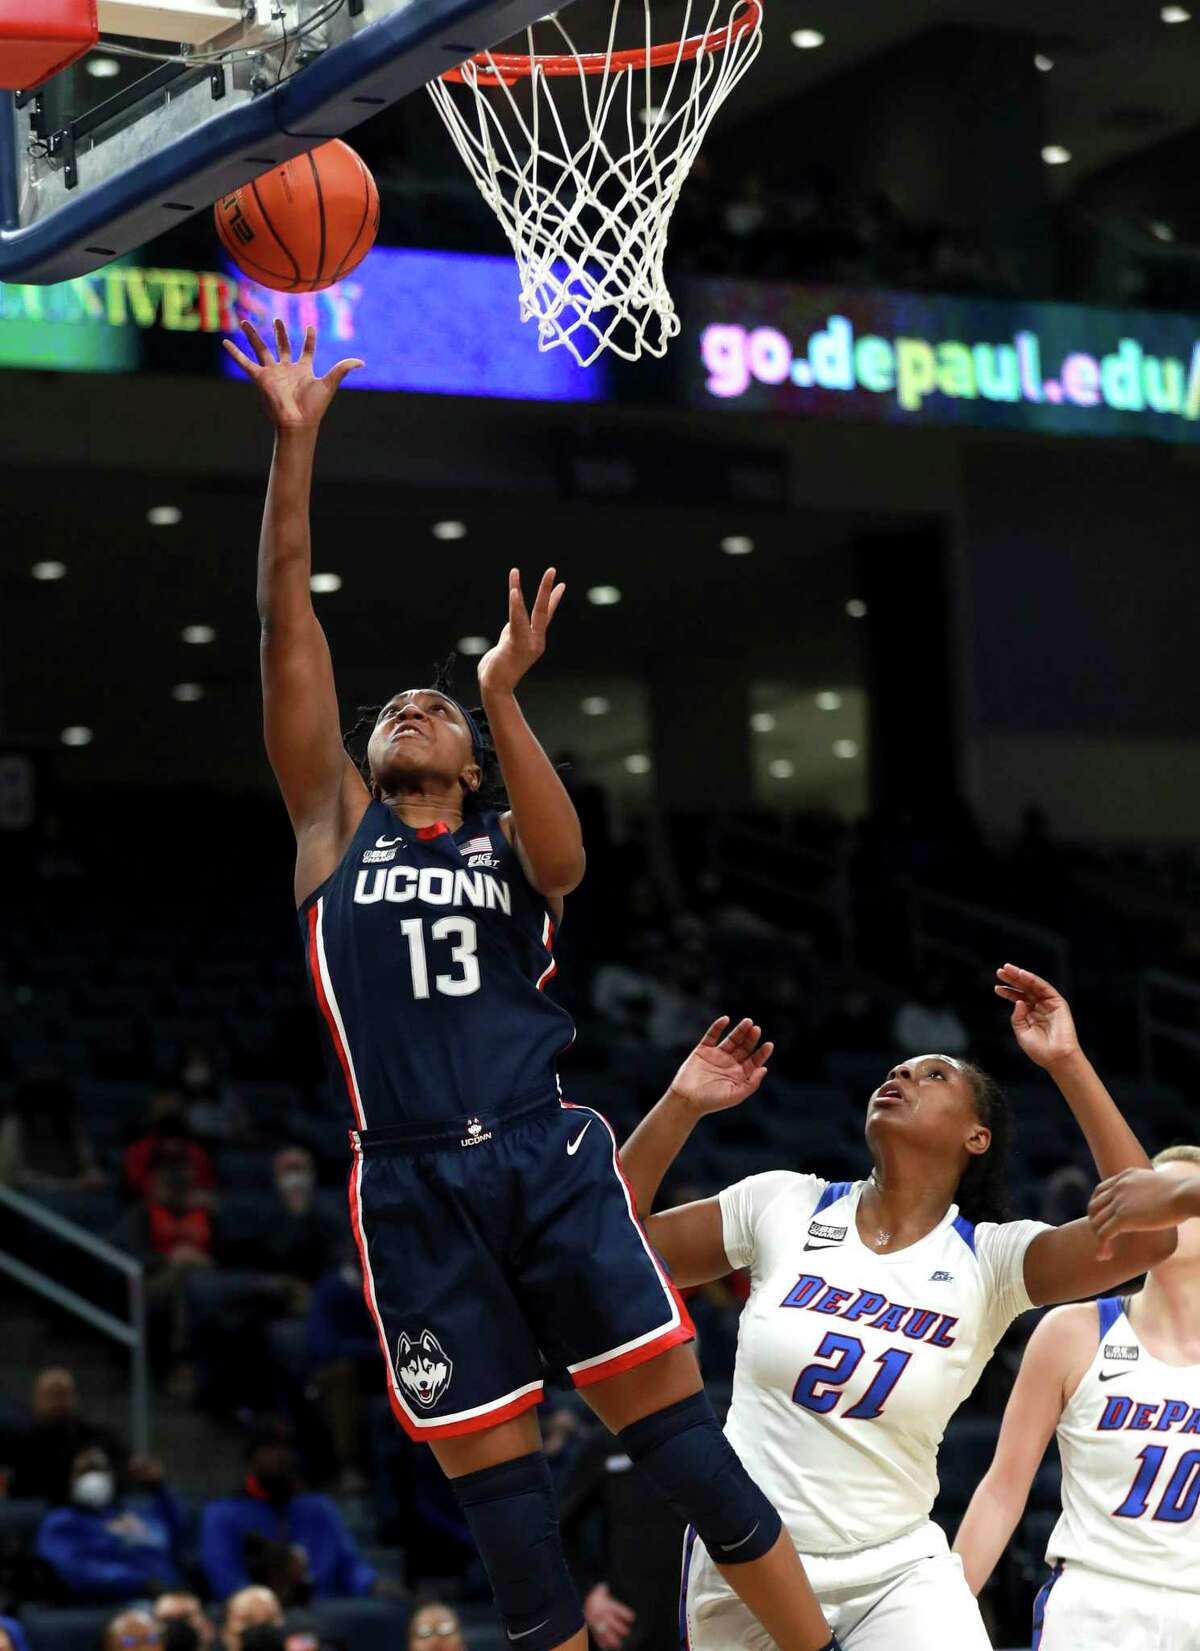 Connecticut guard Christyn Williams (13) drives to the hoop past DePaul guard Darrione Rogers (21) in the first half of an NCAA college basketball game at Wintrust Arena in Chicago on Wednesday, Jan. 26, 2022. (Chris Sweda/Chicago Tribune via AP)